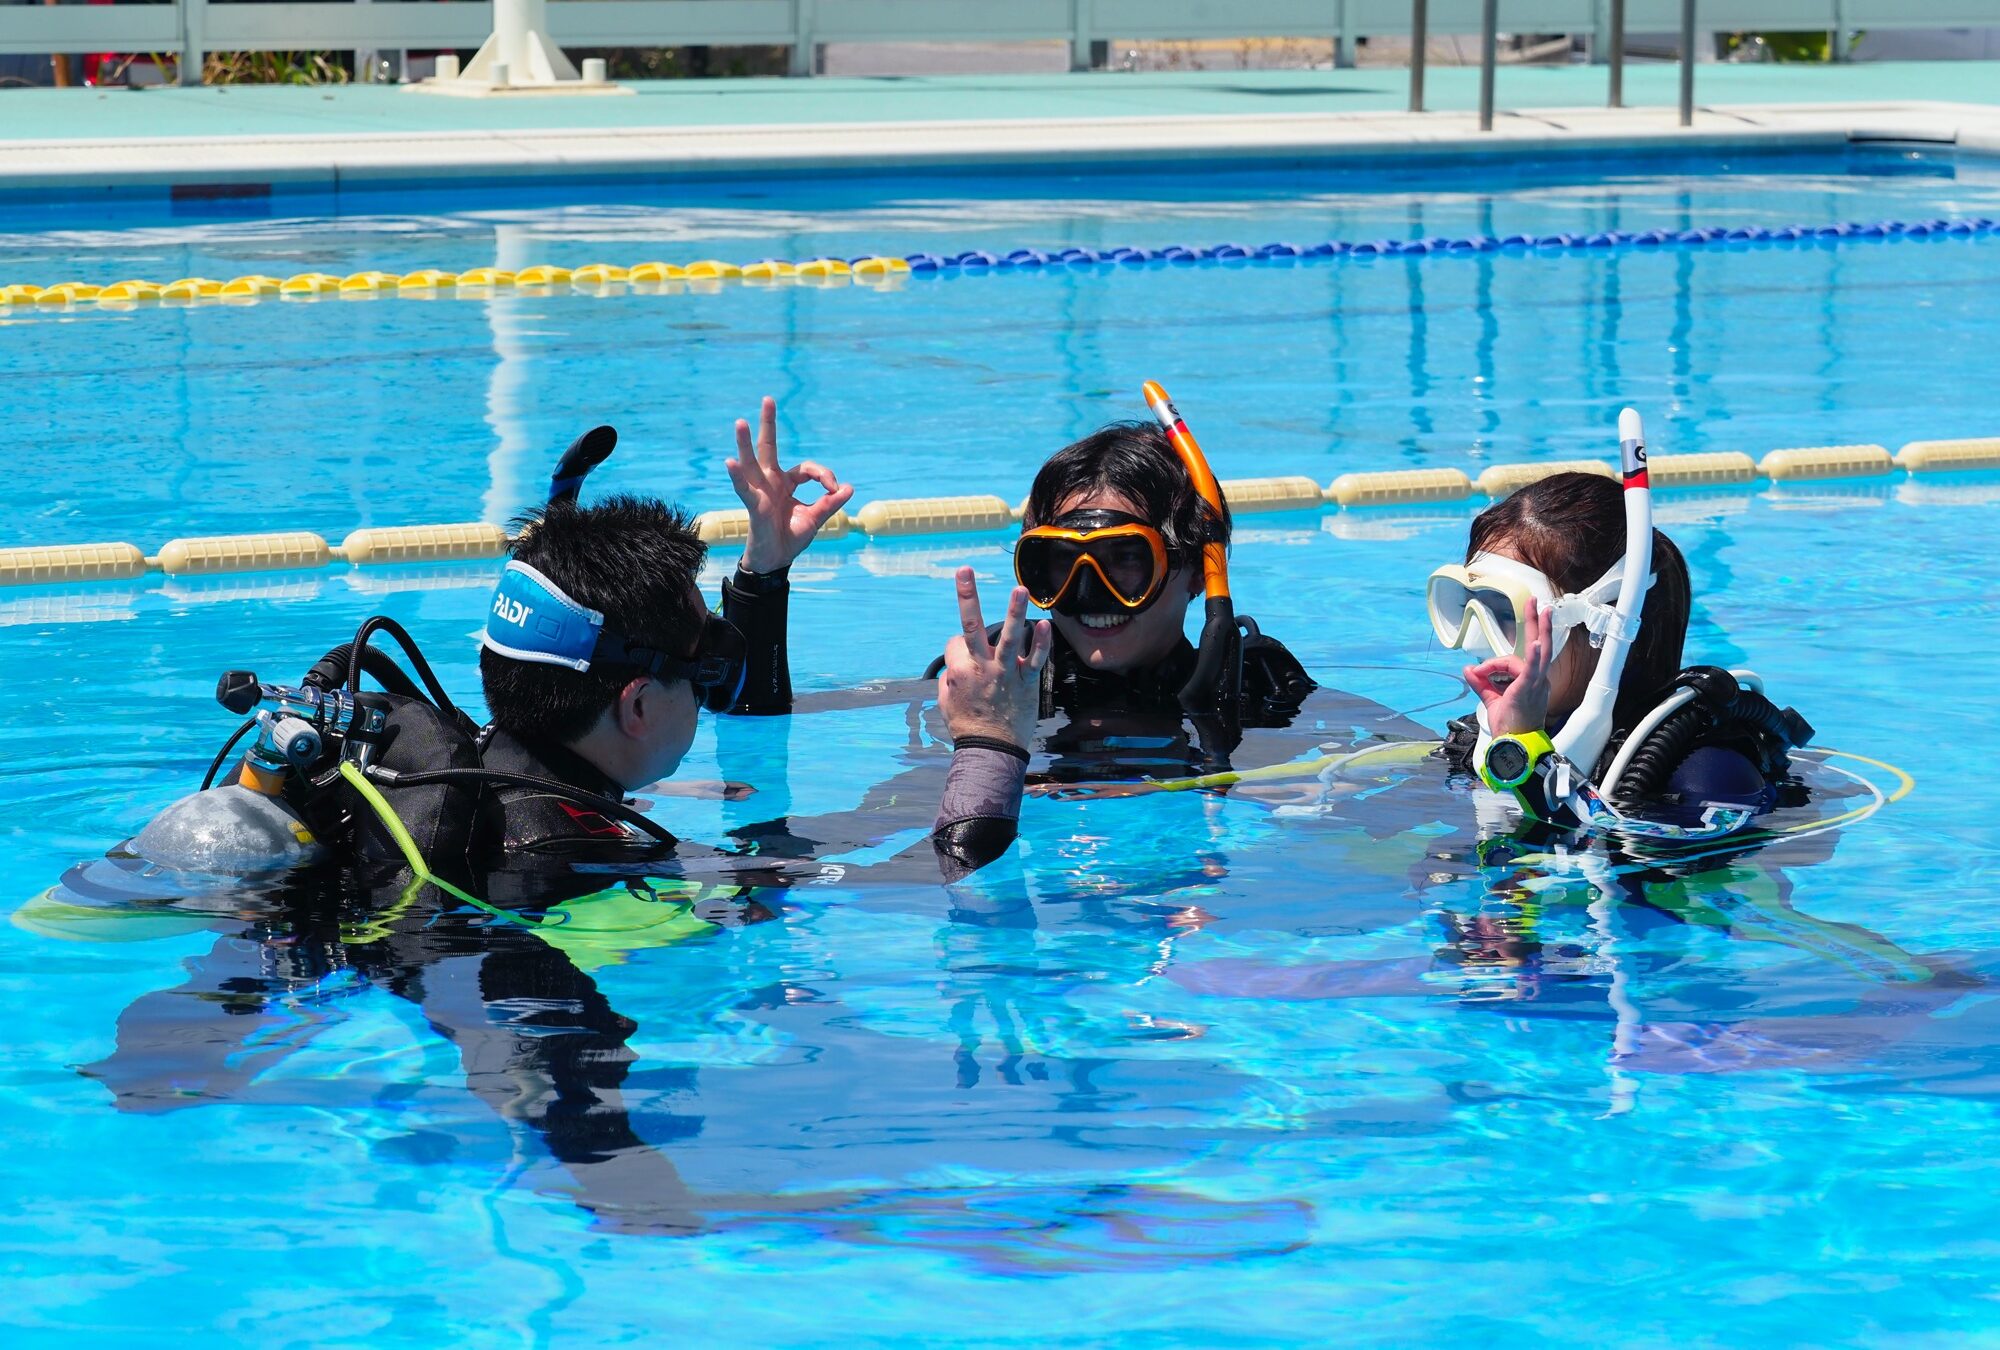 Students learning scuba diving skills in confined water during a PADI Open Water Diver course